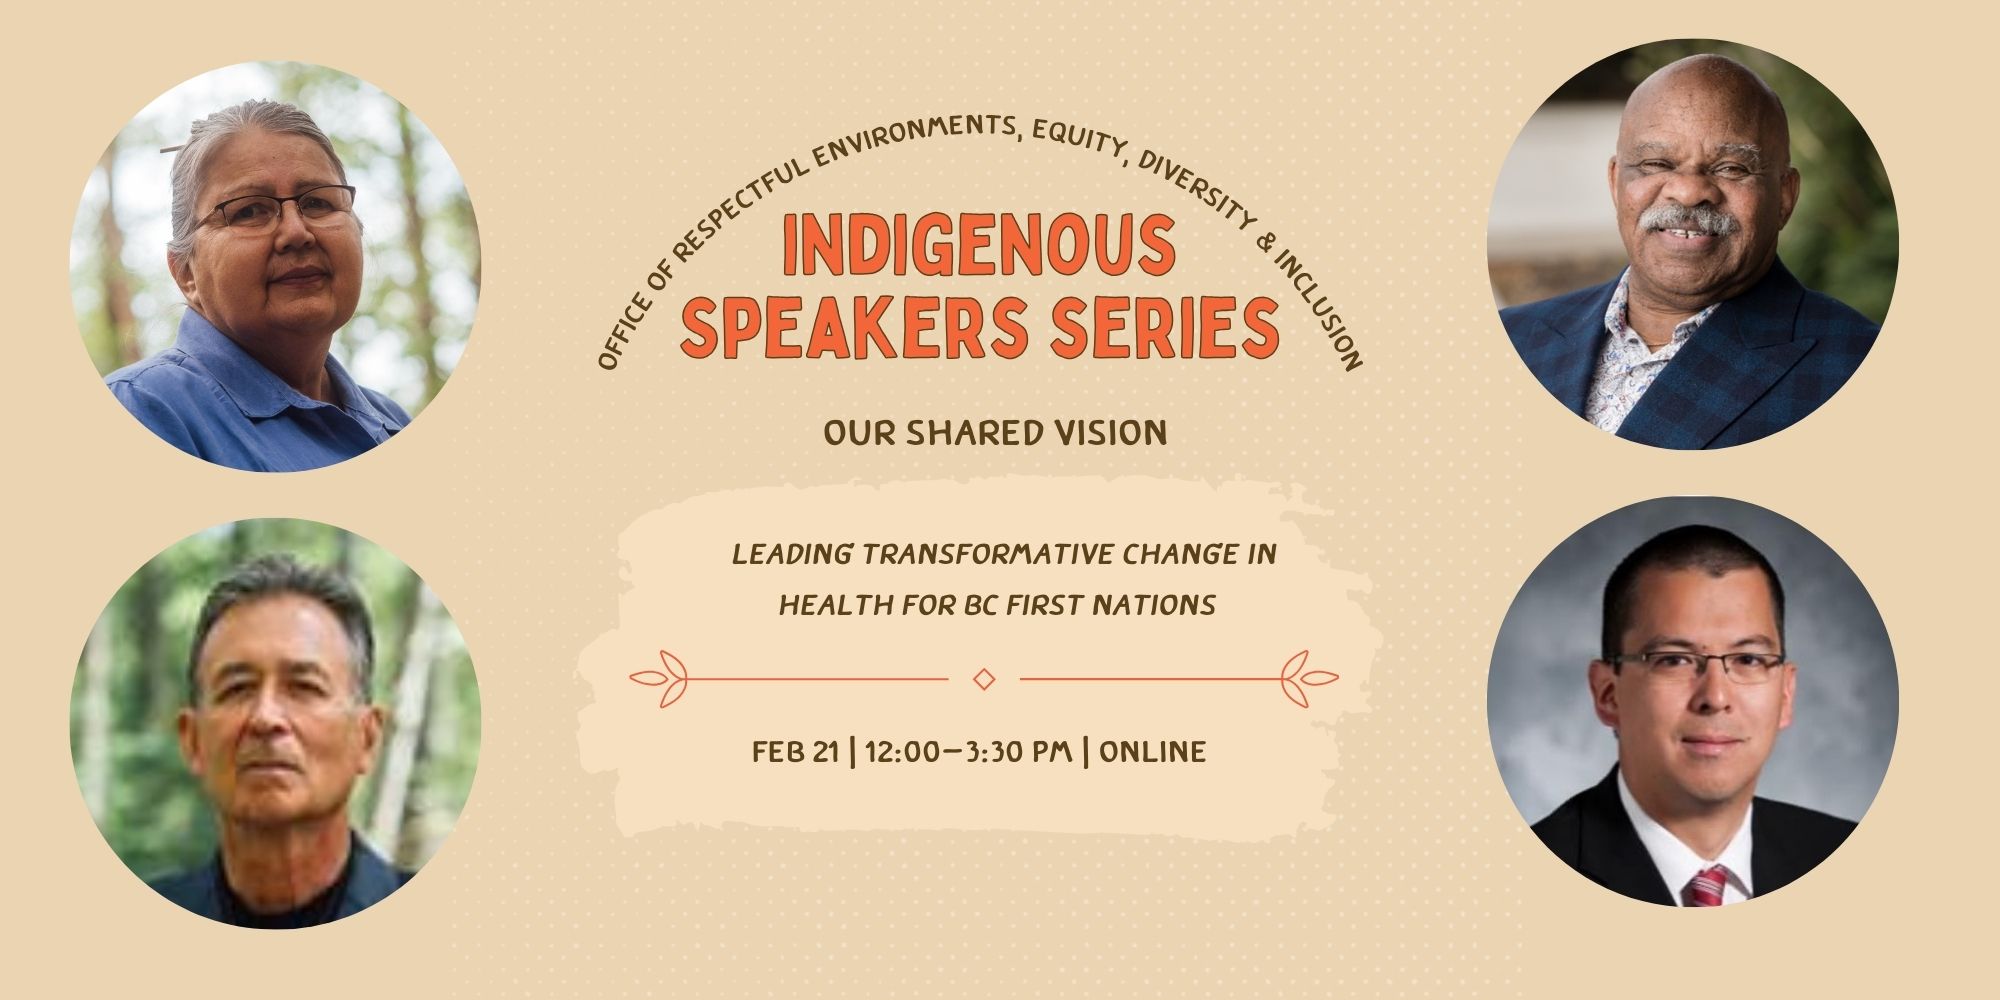 The Faculty of Medicine REDI Office Indigenous Speaker Series presents: Our Shared Vision: Leading Transformative Change in Health for BC First Nations